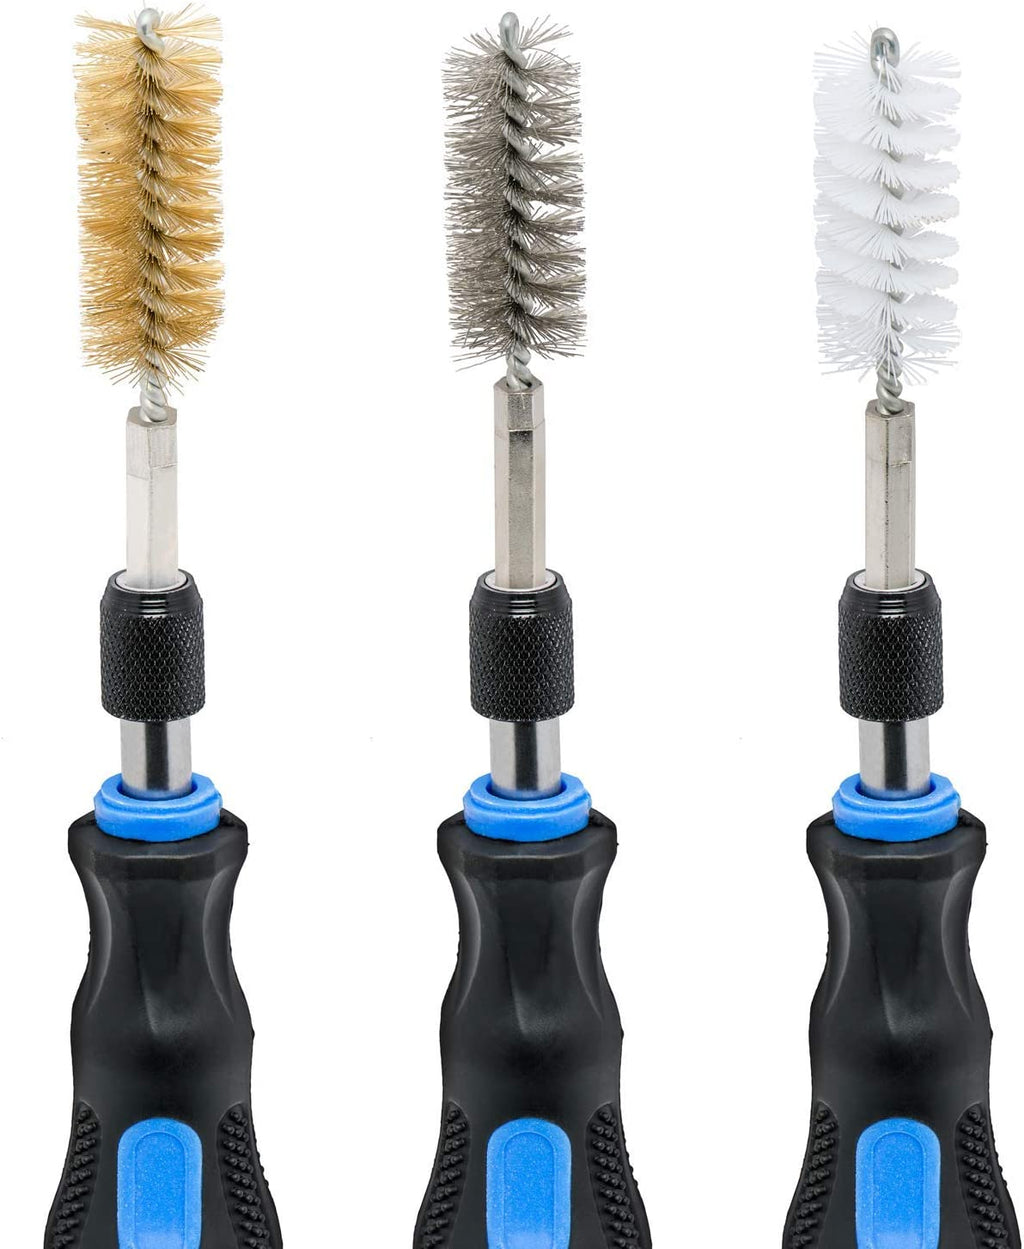 Engine Cleaning Brushes, 4 piece